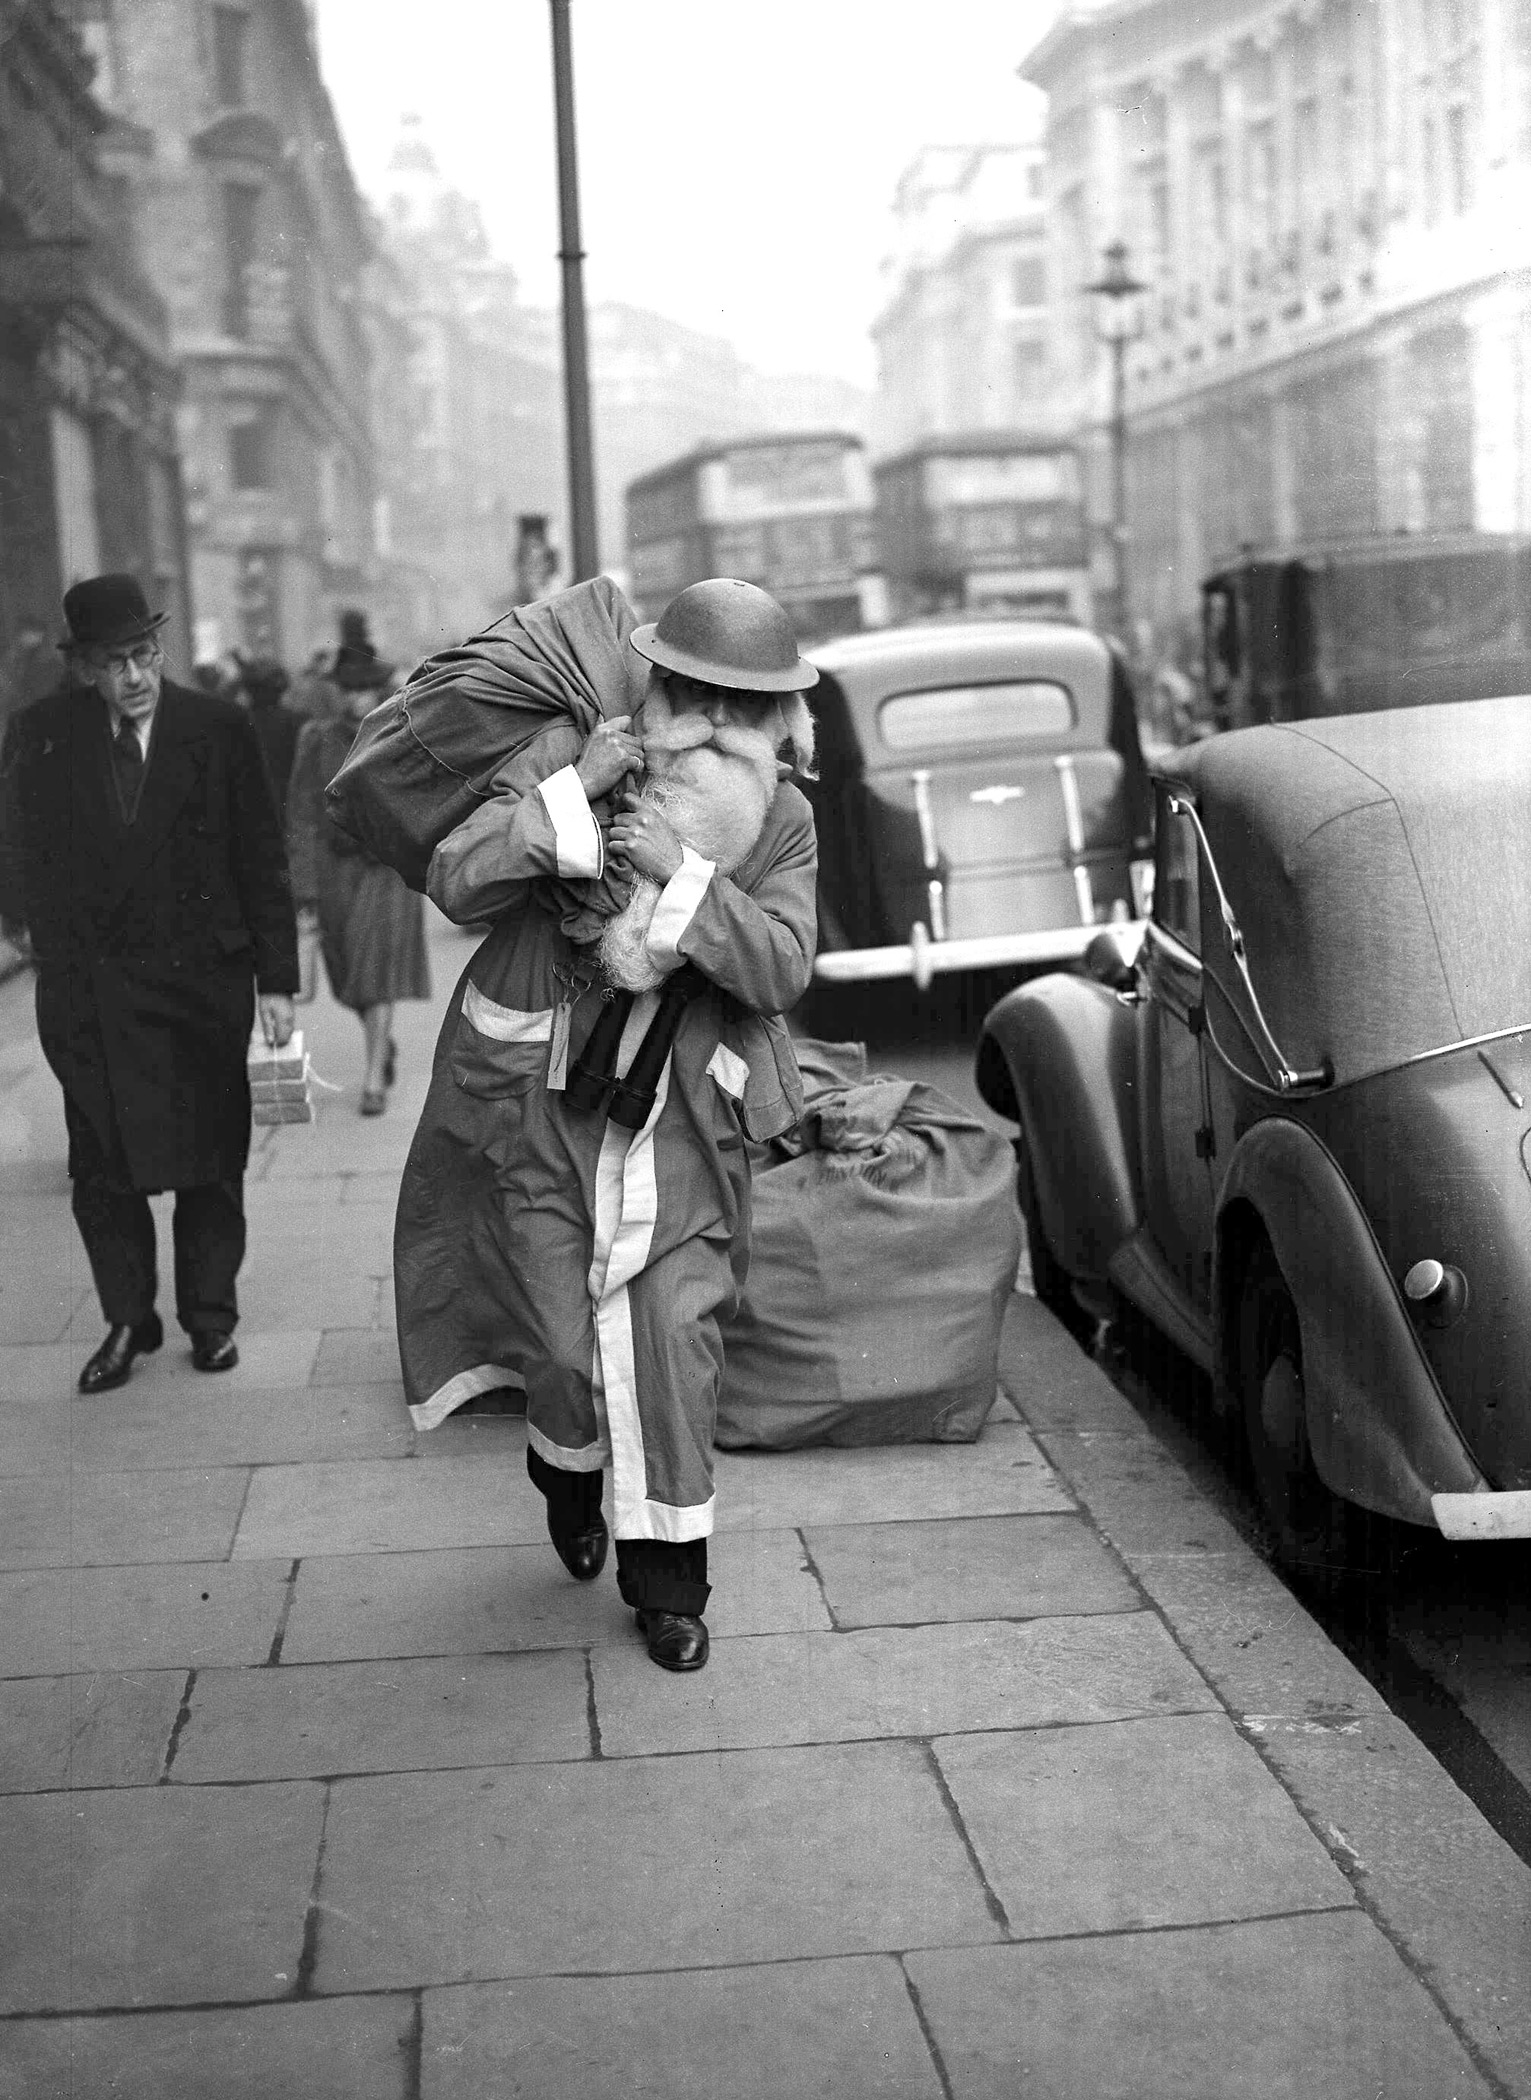 Father Christmas walks the streets of wartime London, The old man has exchanged his civilian red hood for a warlike 'tin hat', but, blitz or no blitz, he is delivering goods this year. December 1940.